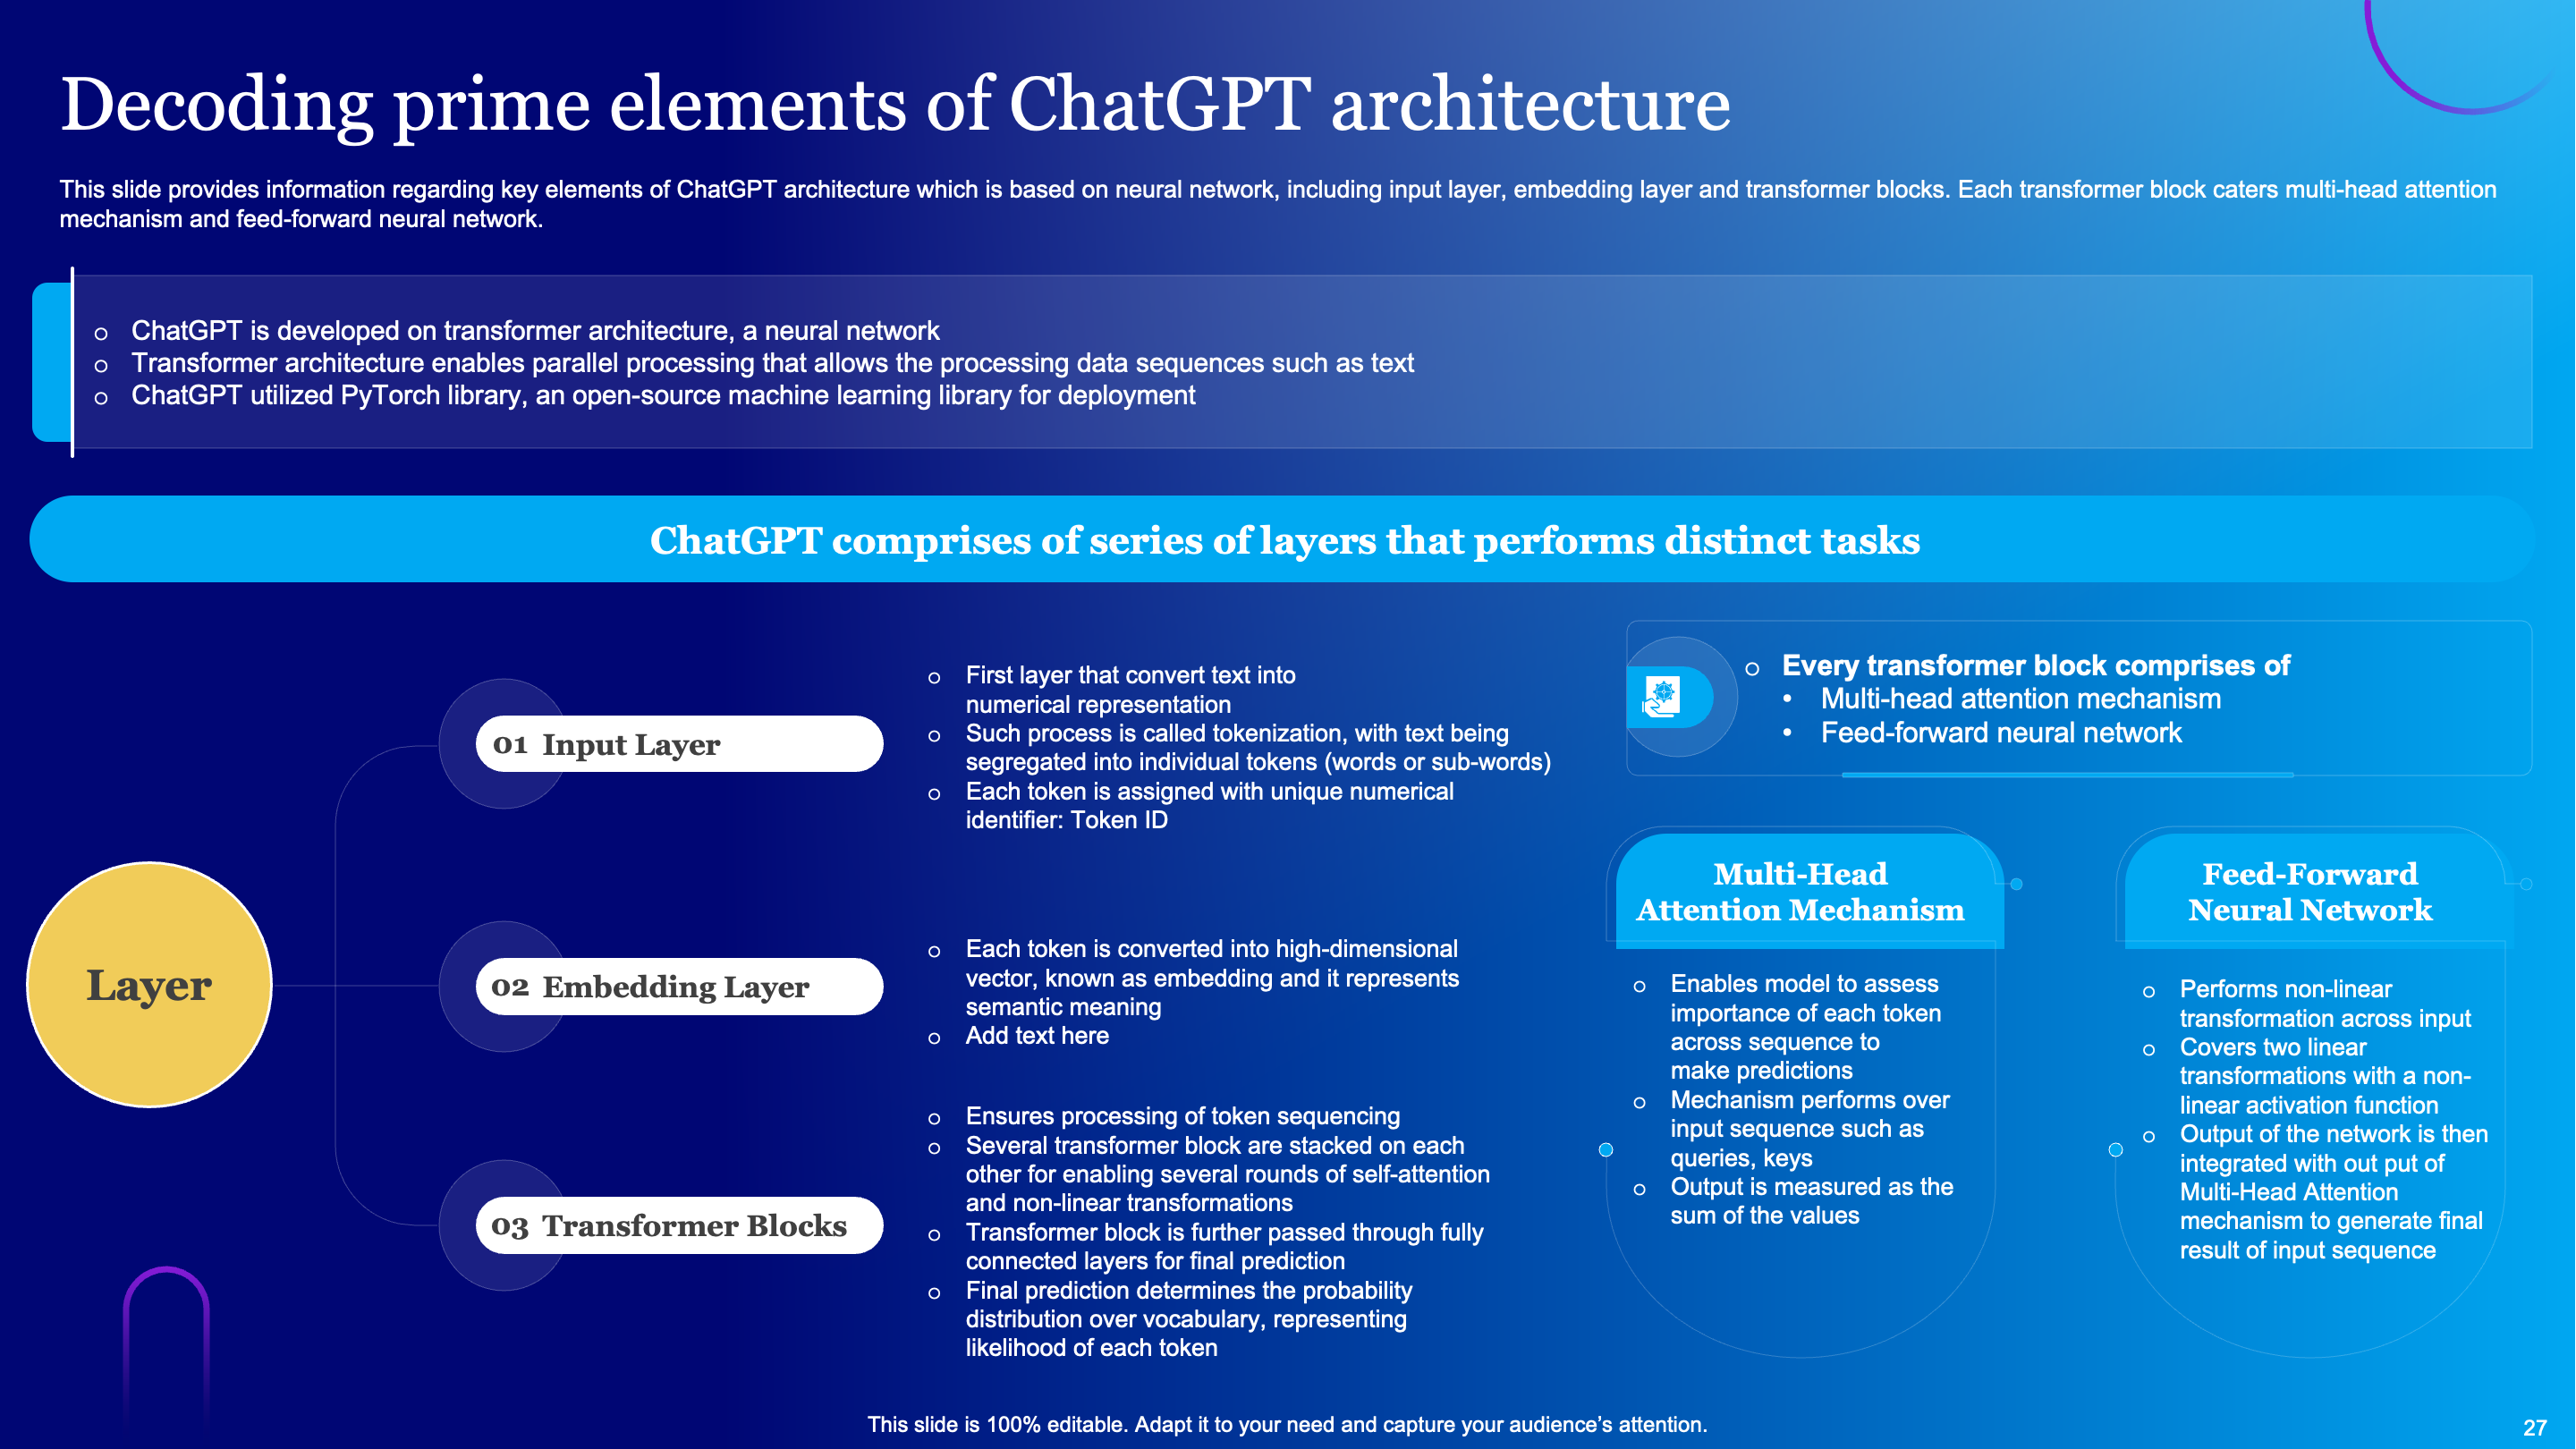 Decoding Elements of ChatGPT Architecture